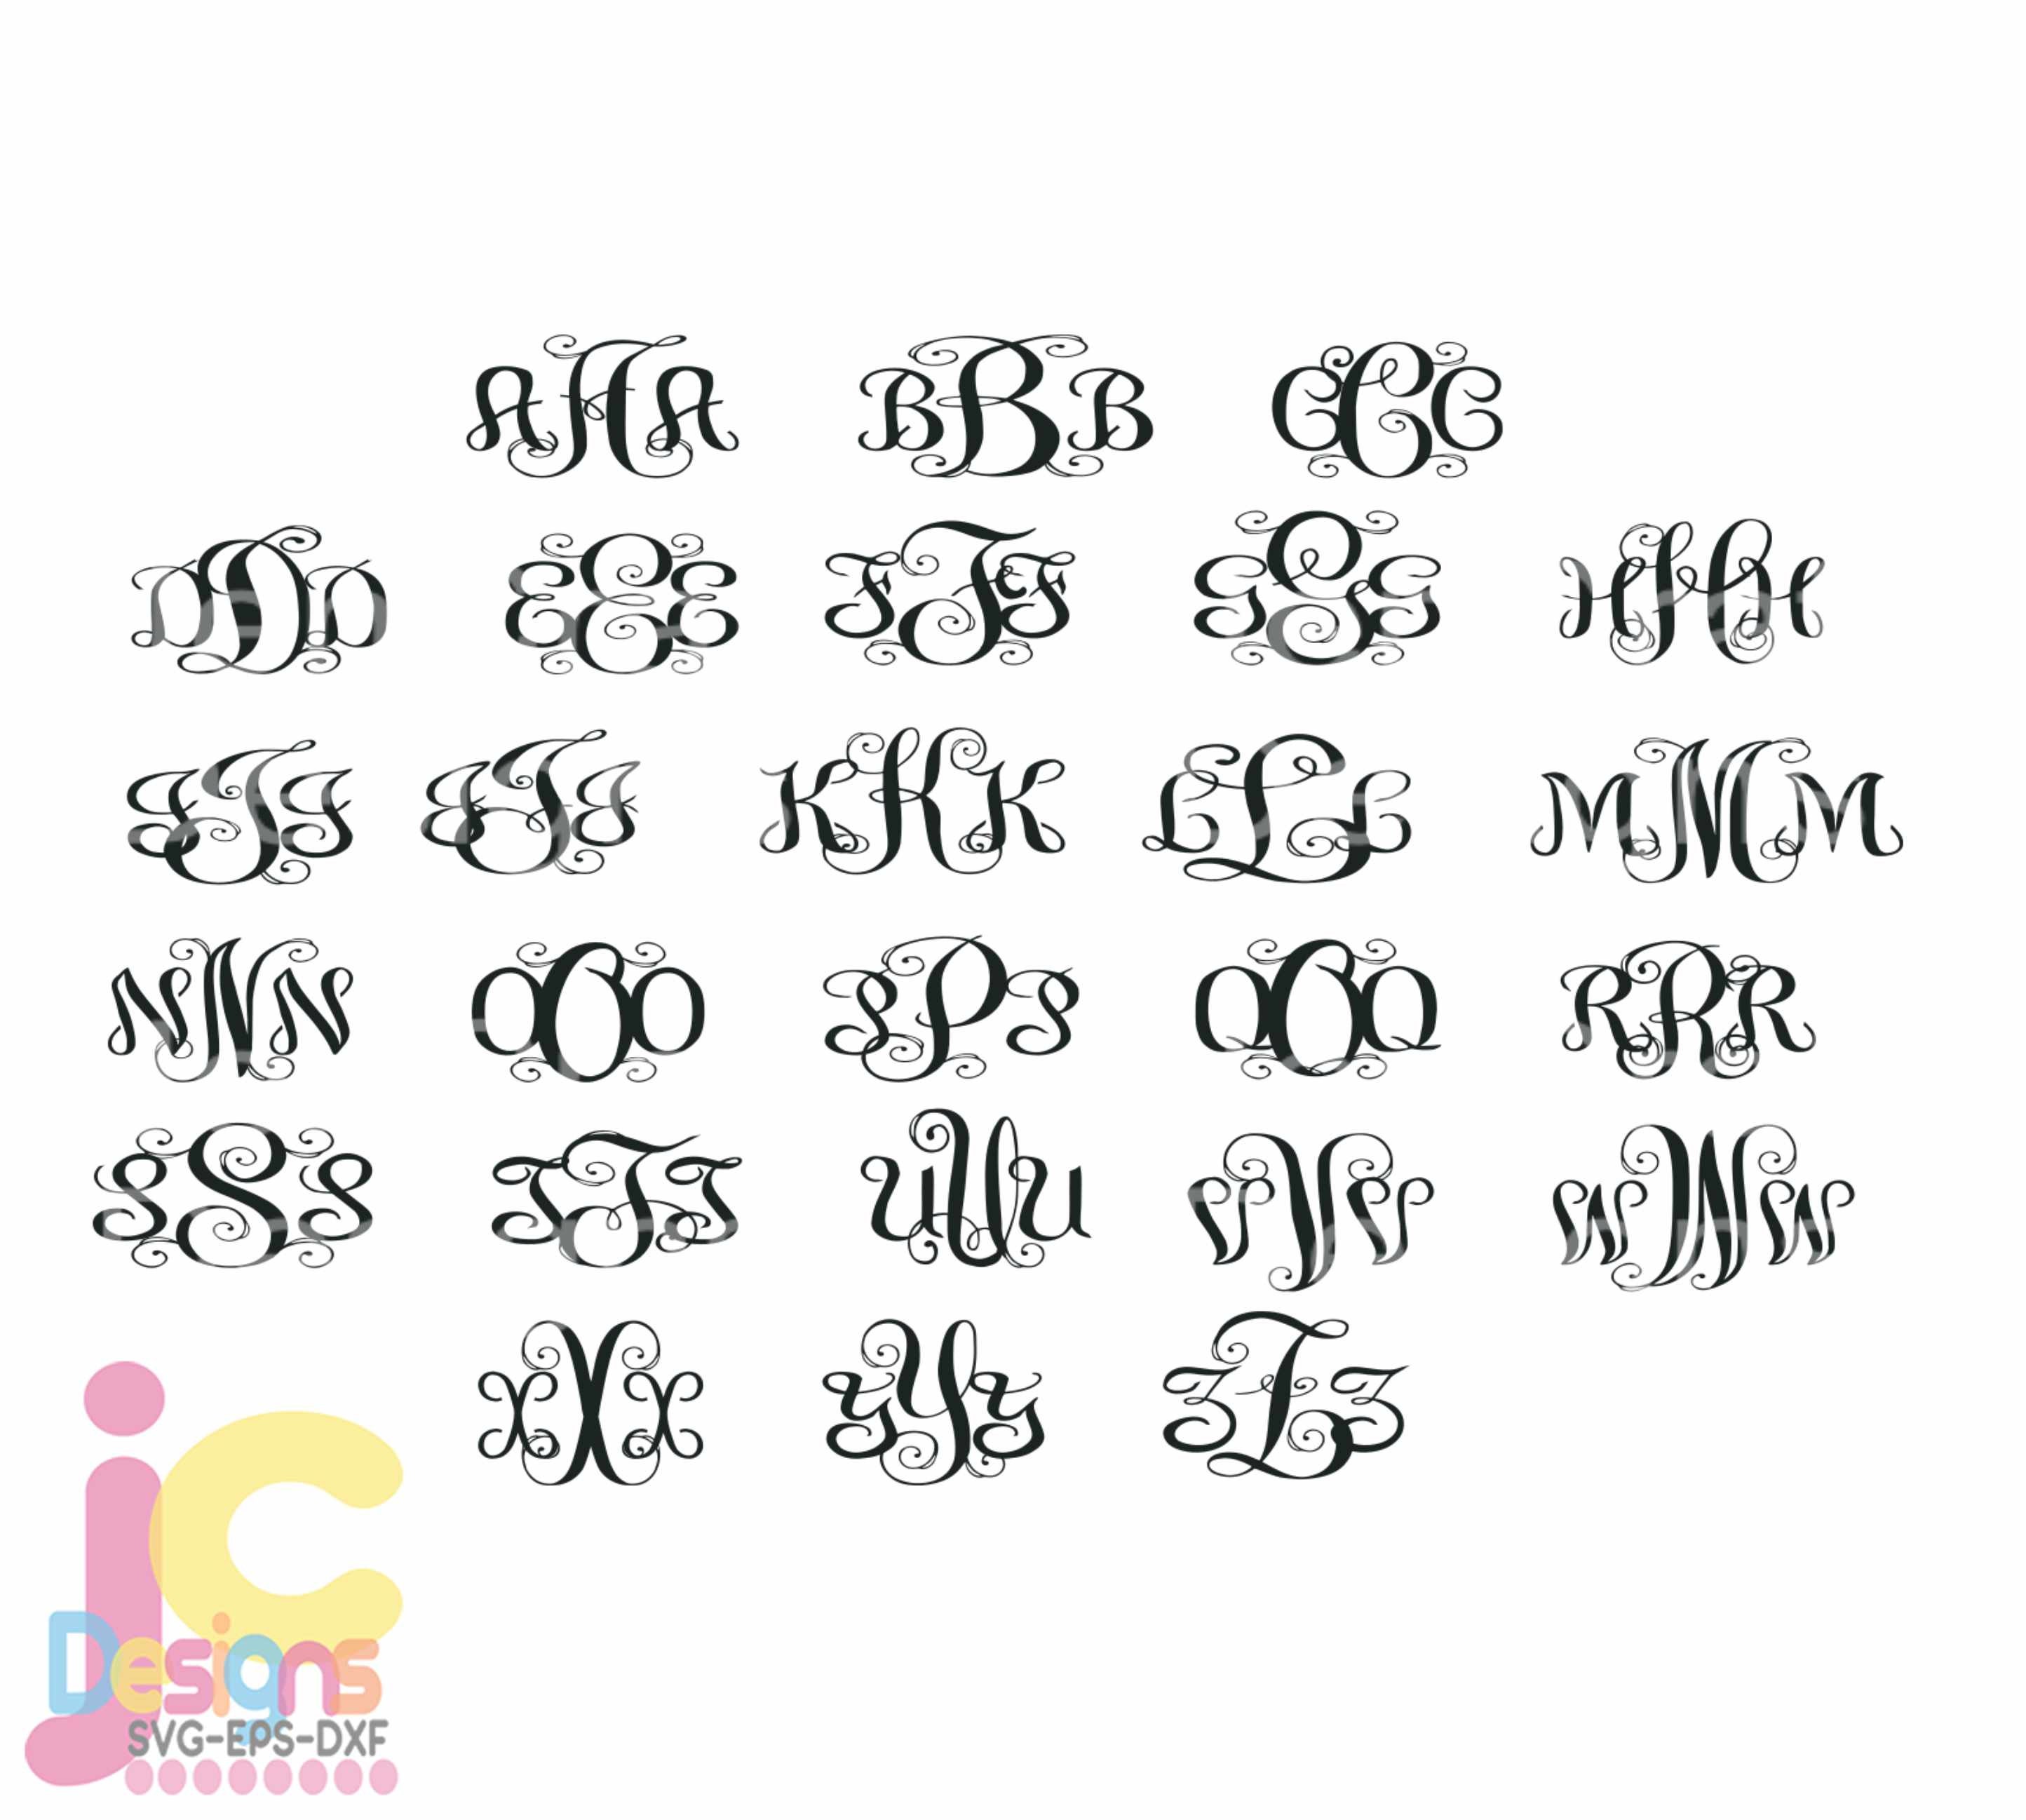 Cool Lettering (Fancy Text, Cool Fonts, Stencils) – DIY Projects, Patterns,  Monograms, Designs, Templates